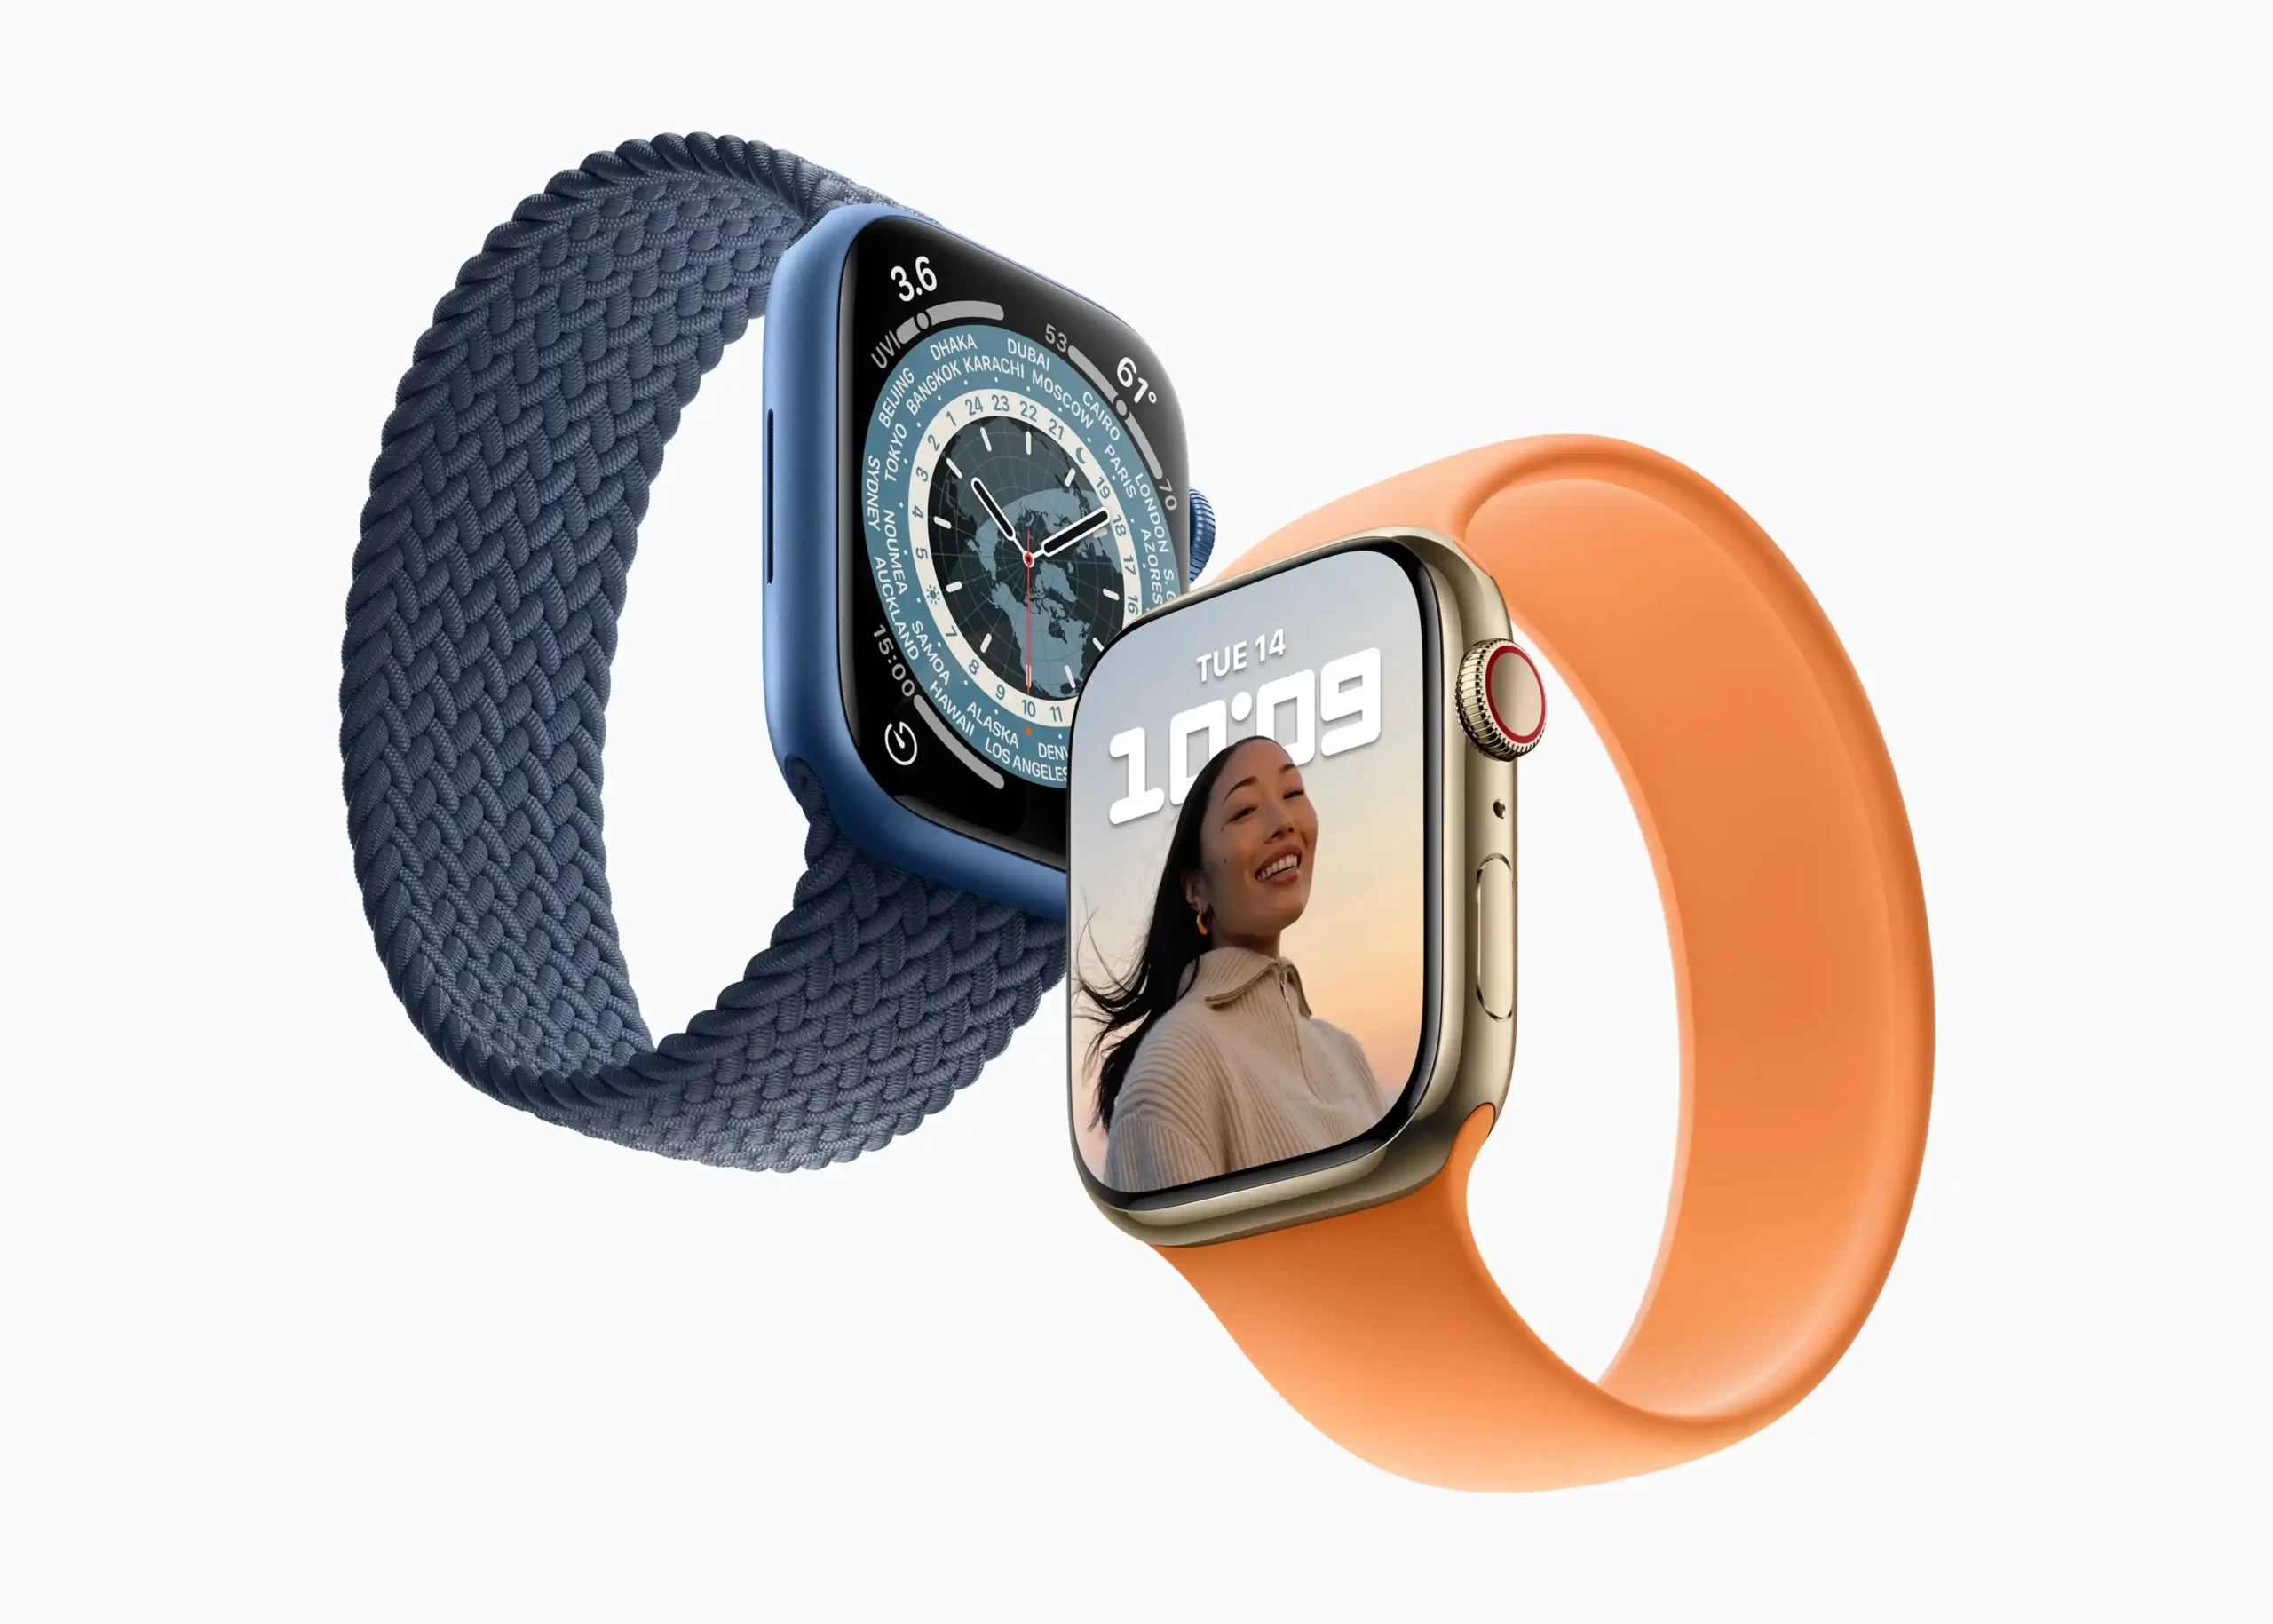 What Makes the Apple Watch Series 7 Stand Out?